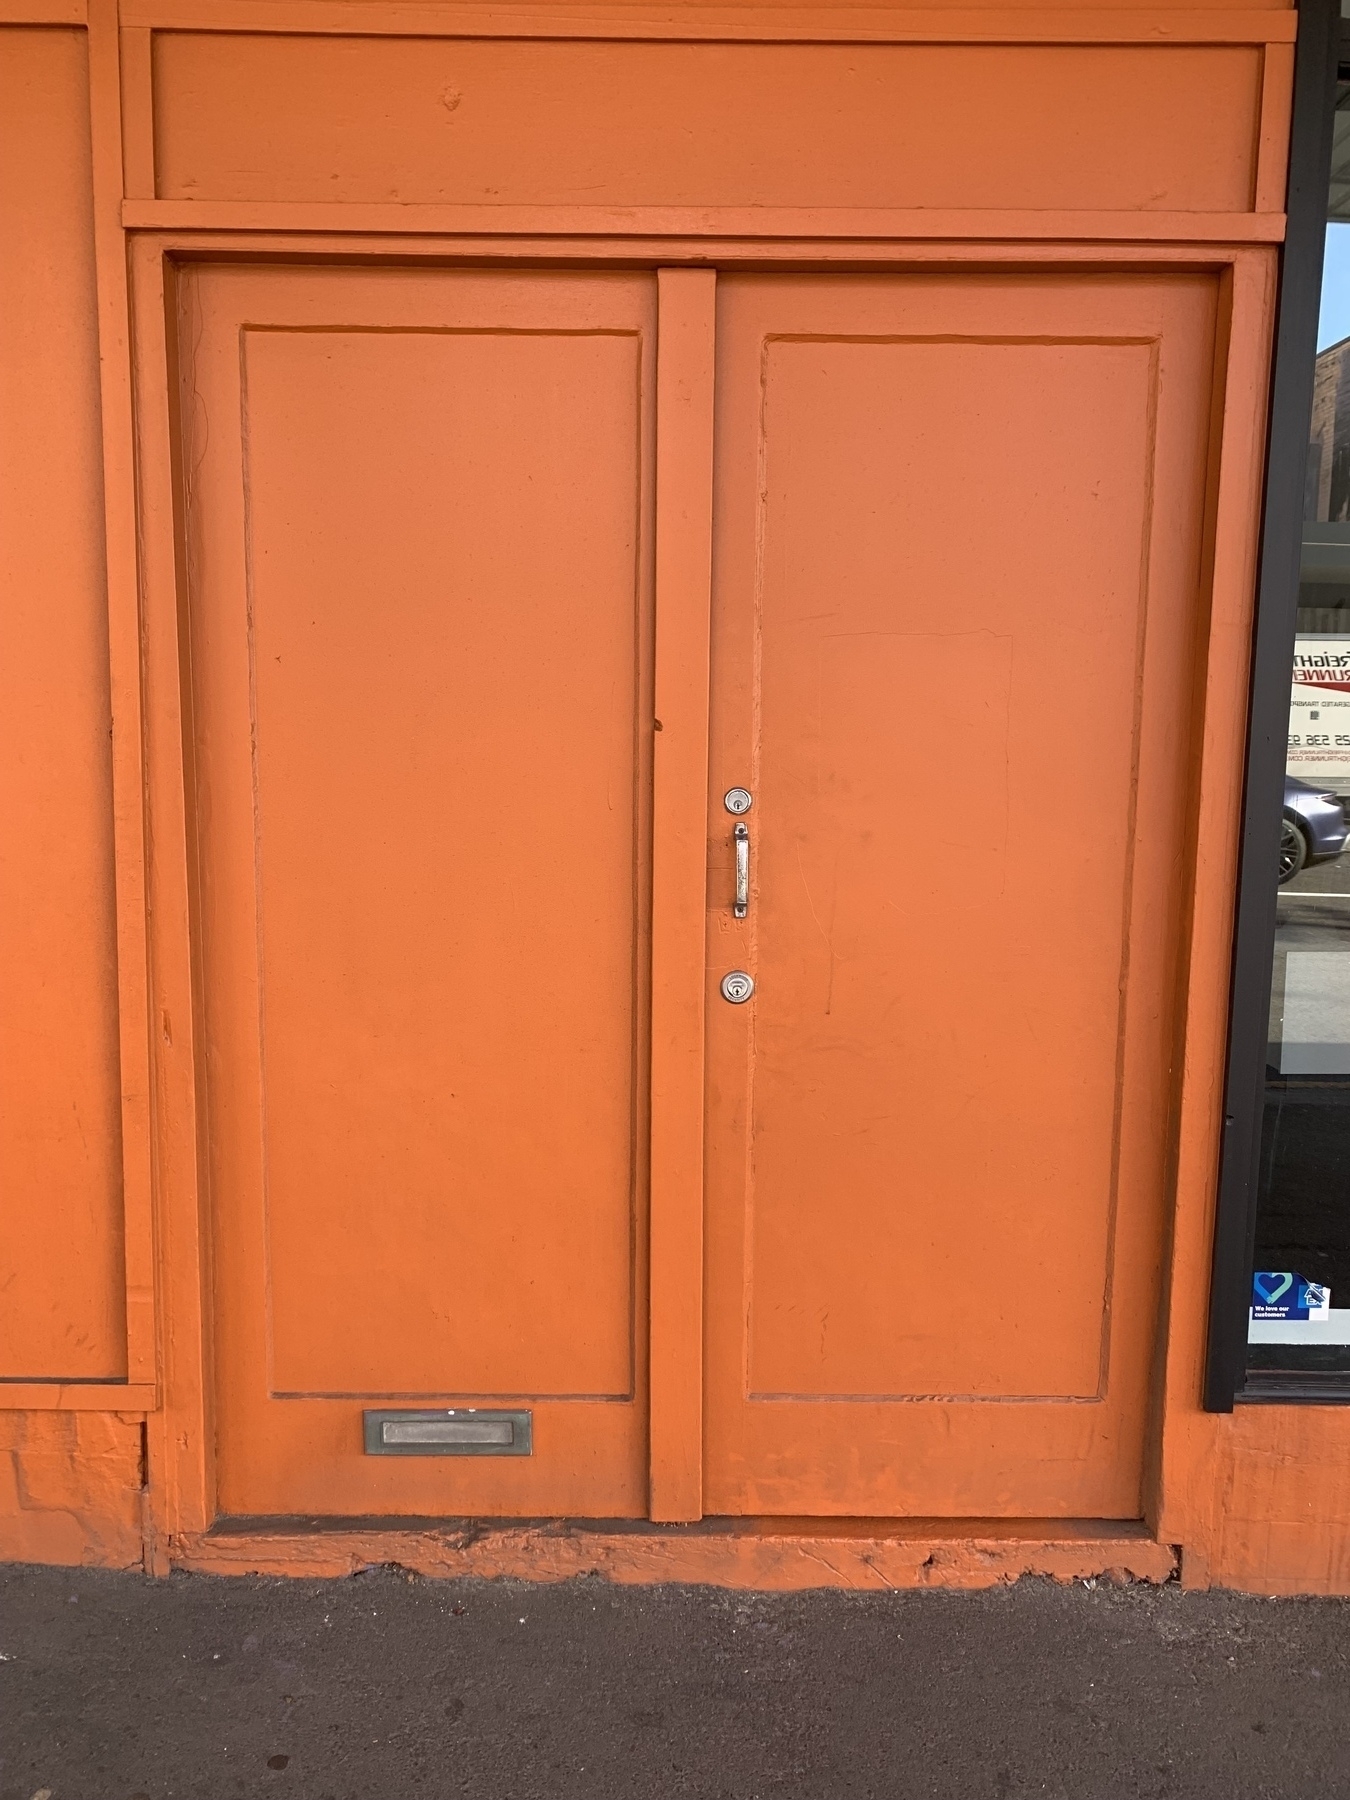 A double wooden door and door frame painted bright orange, with a mail slot at the very bottom of the left door